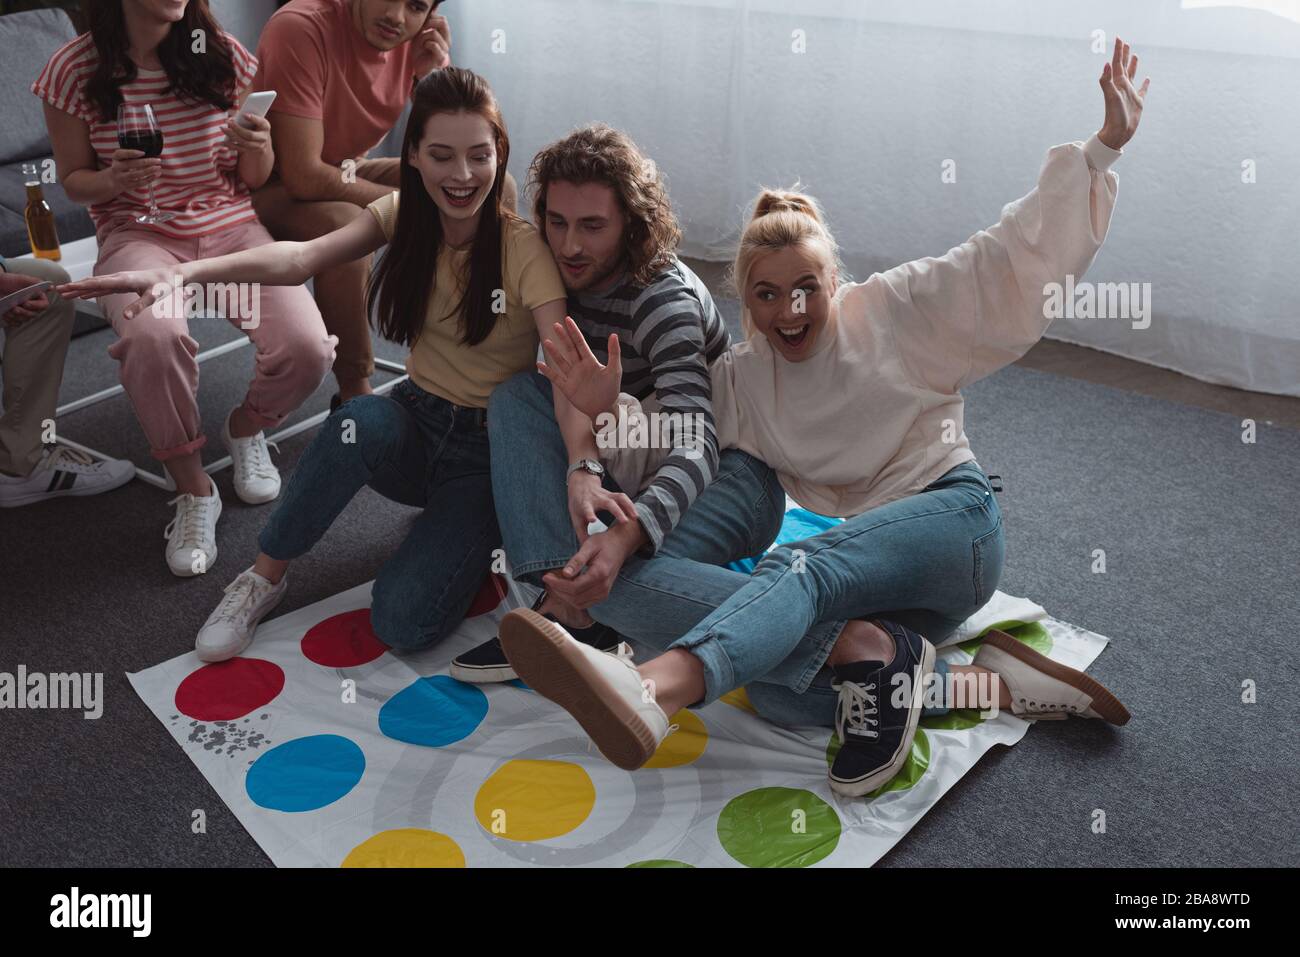 KYIV, UKRAINE - JANUARY 27, 2020: high angle view of friends sitting on twister game mat while others resting on sofa Stock Photo